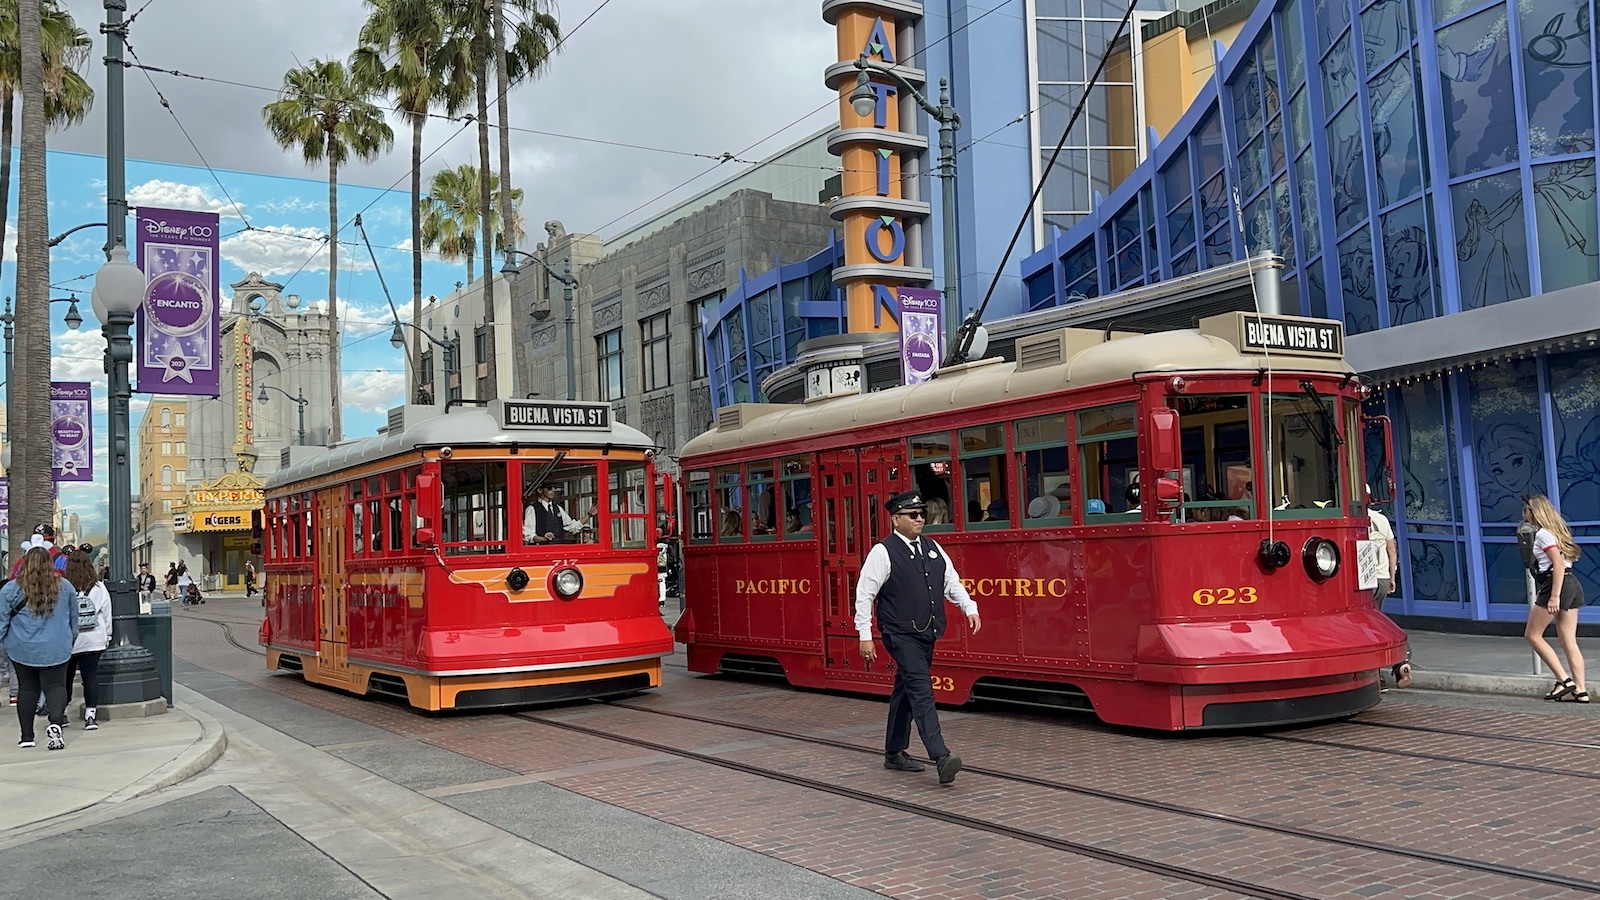 Two Red Car Trolleys Once Again Operating at Disney California Adventure